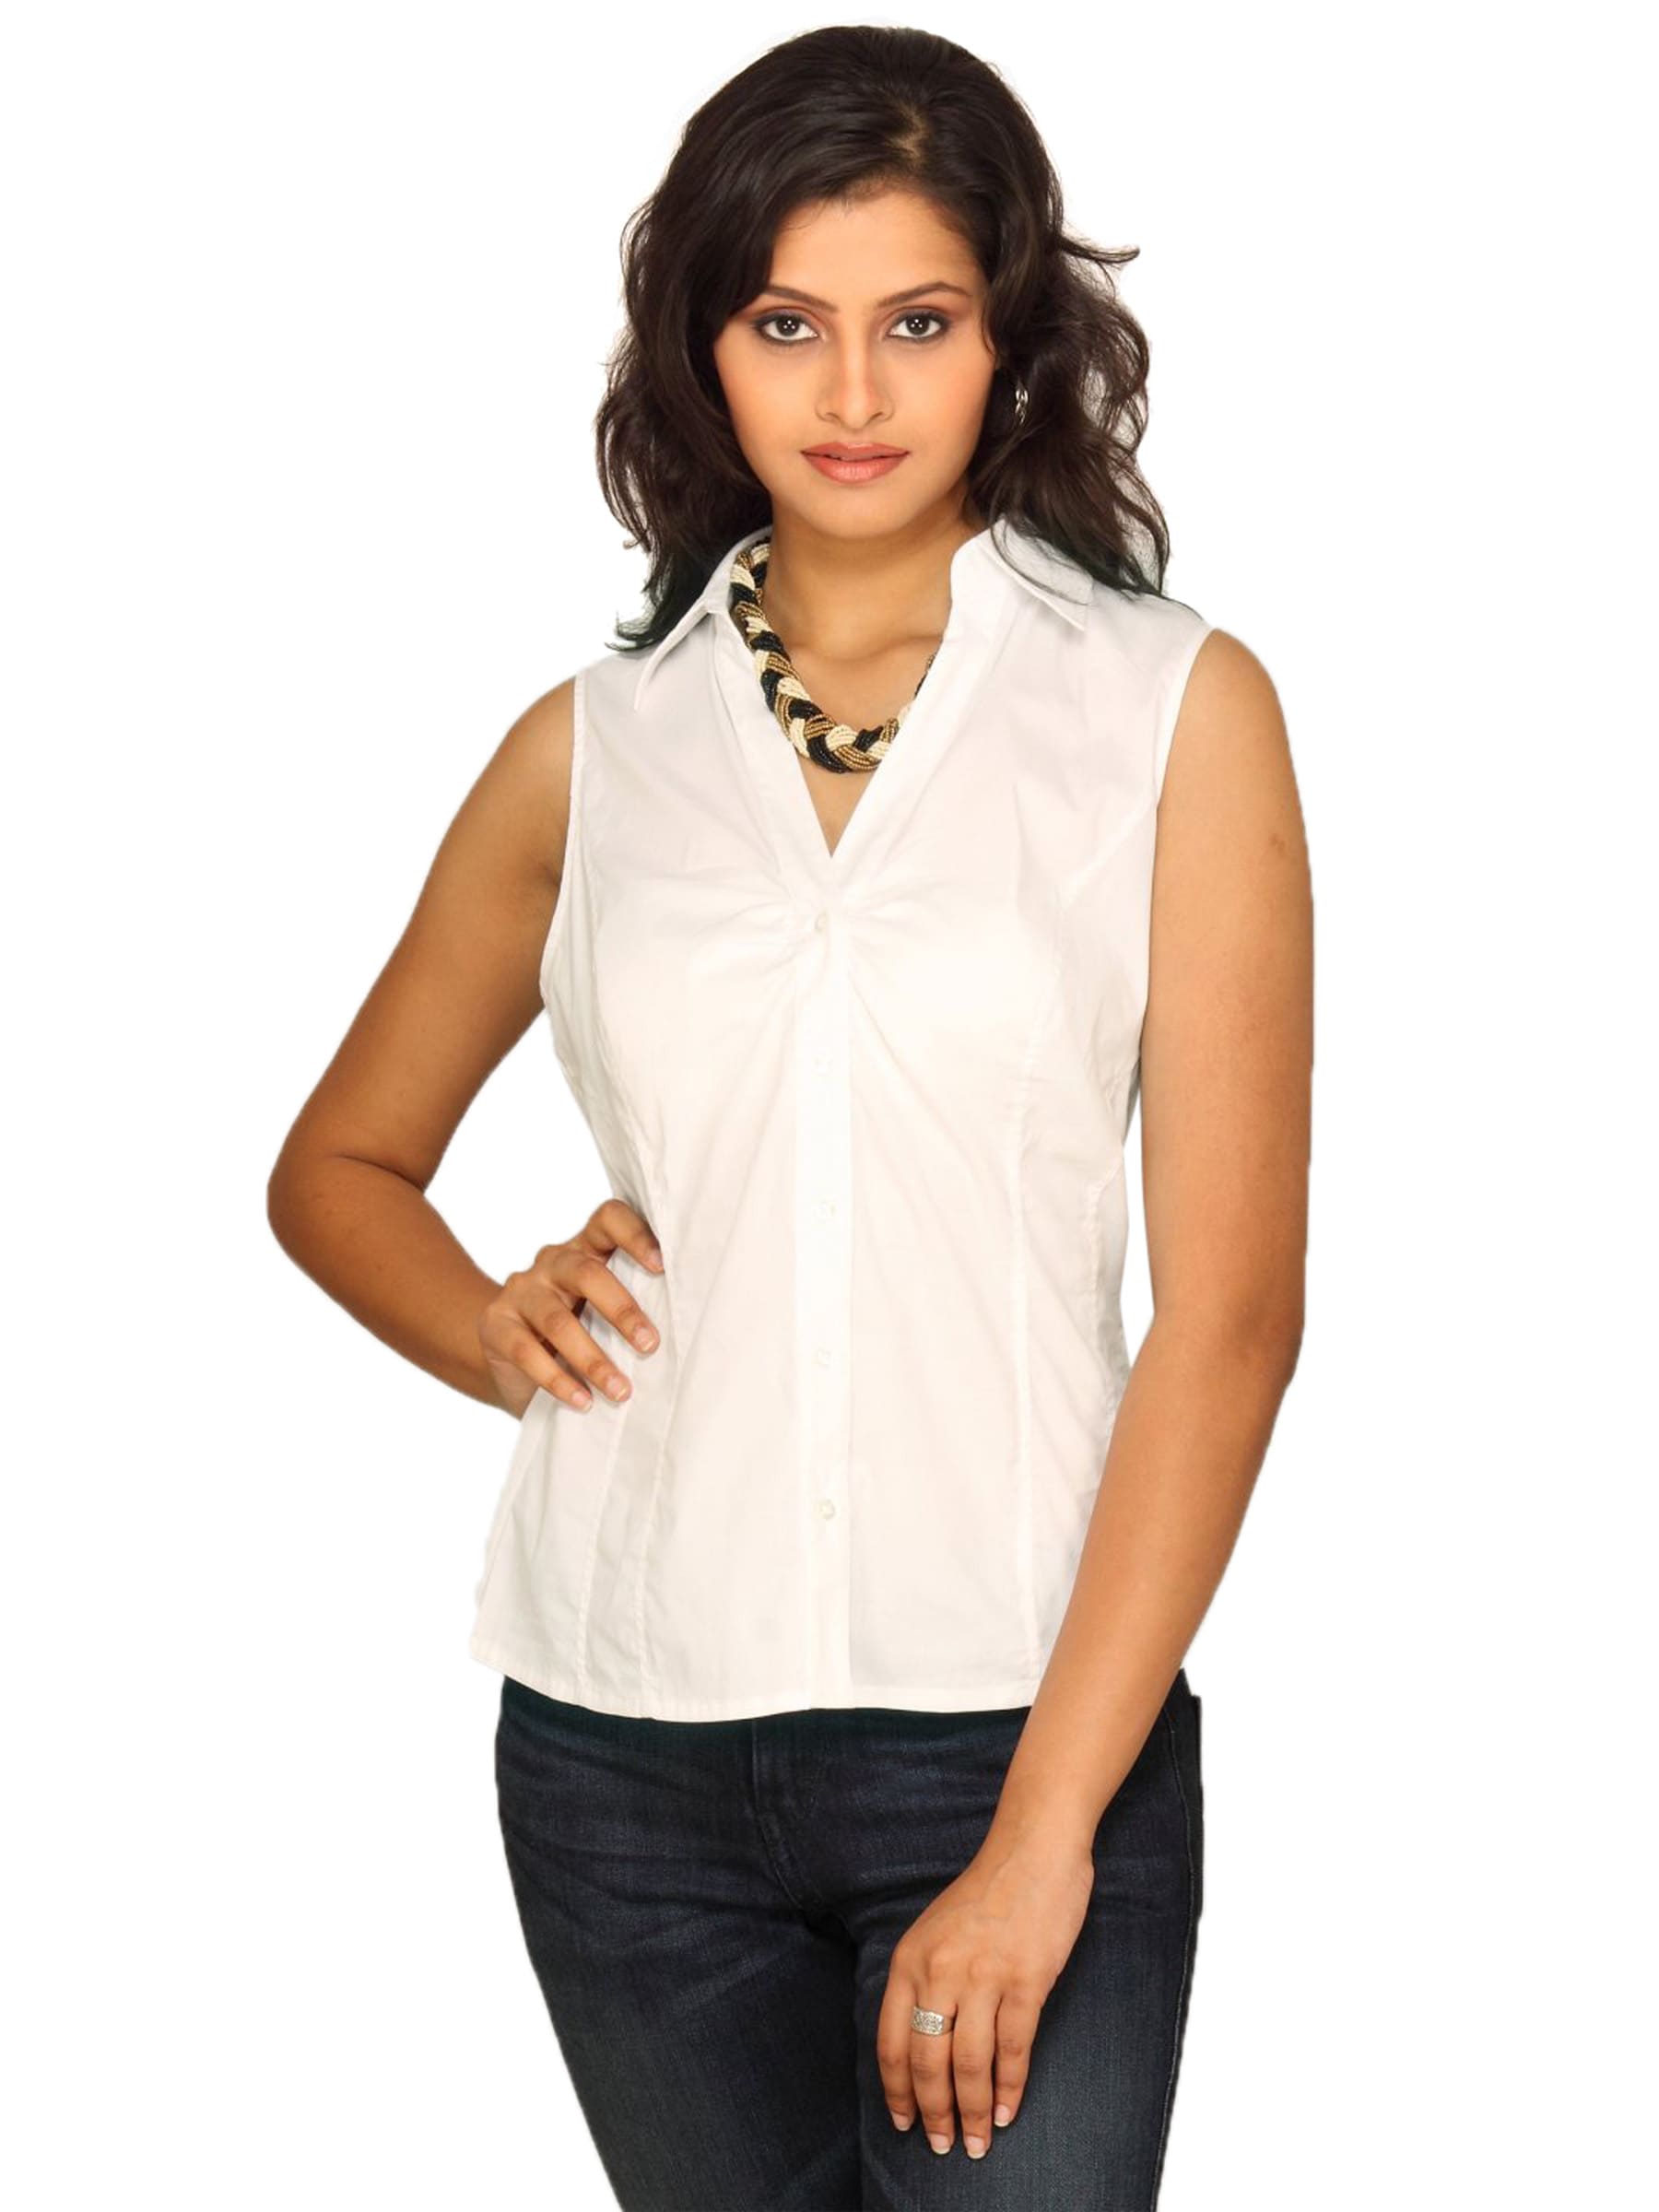 s.Oliver Women's White Blouse Top